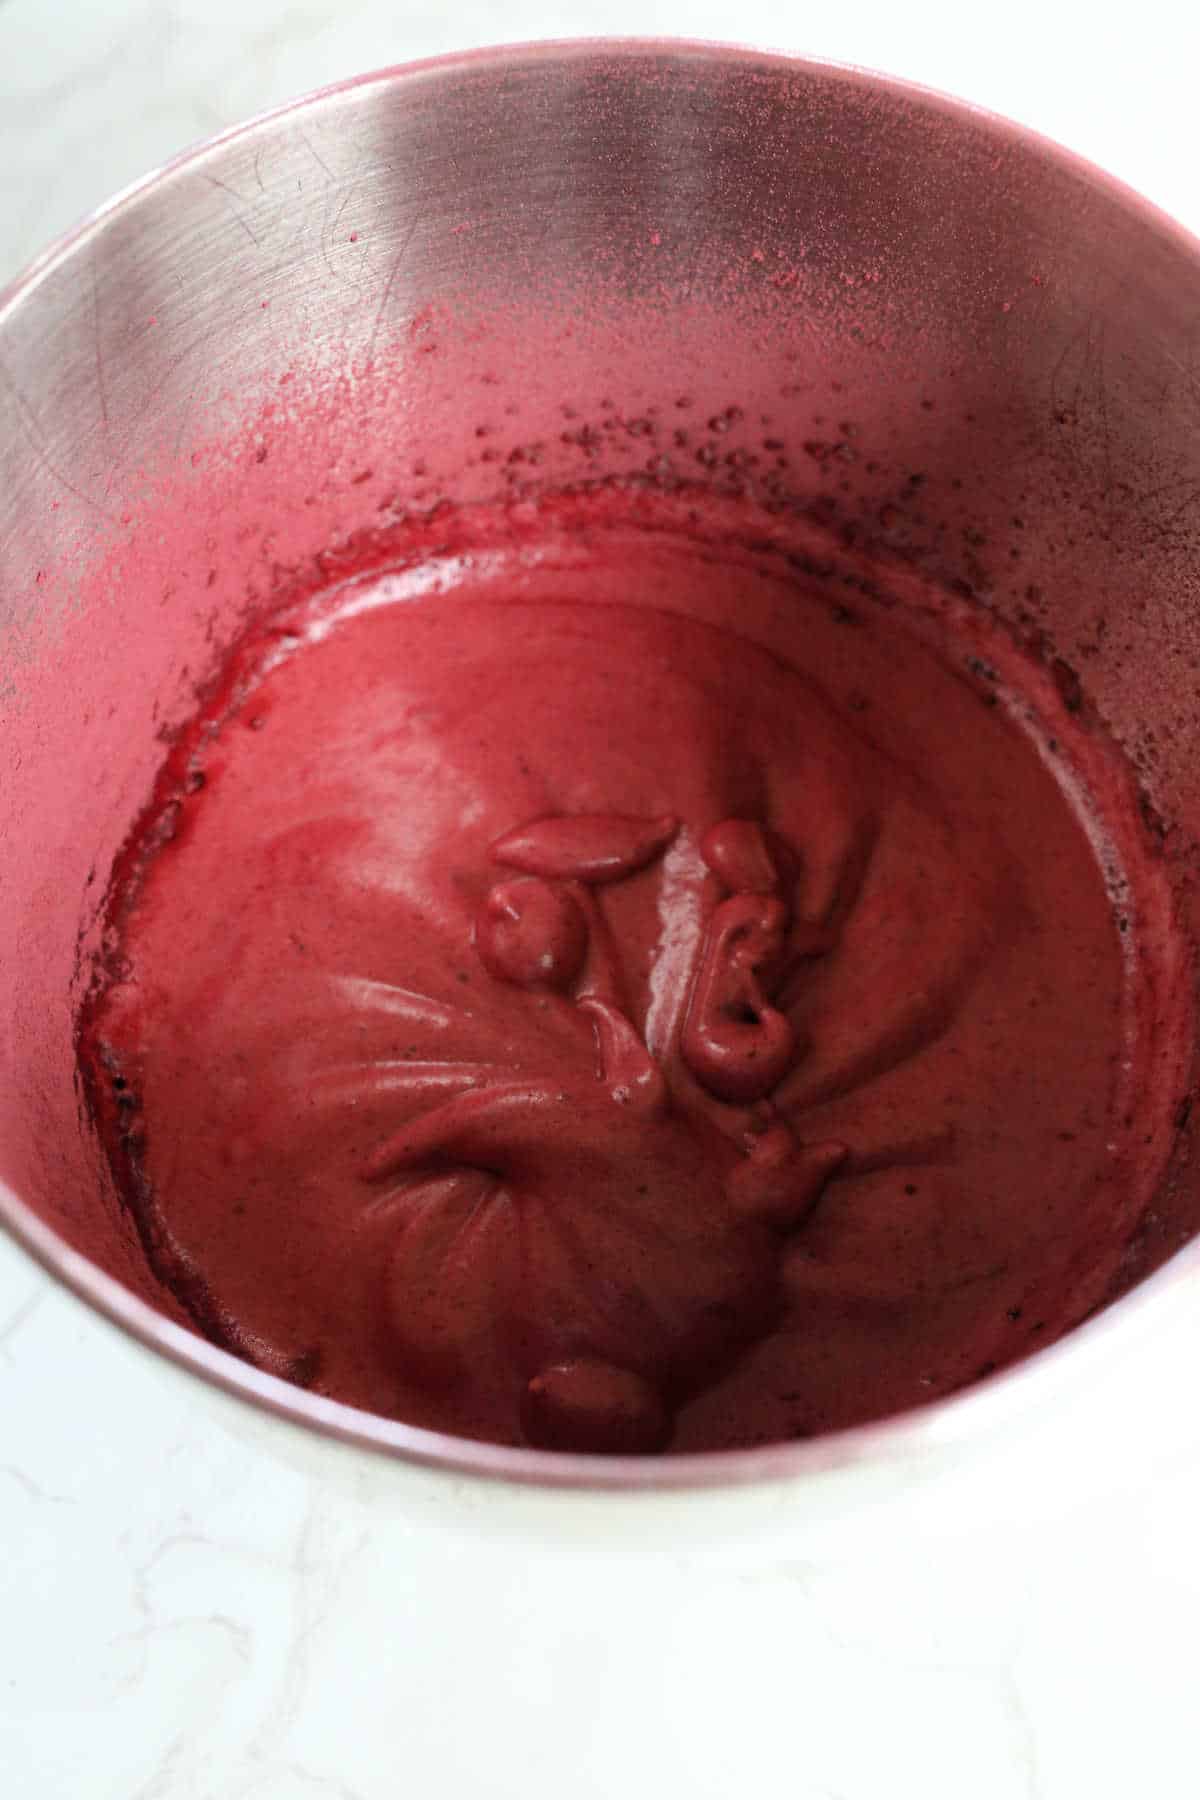 Beet souffle in a mixing bowl before baking.